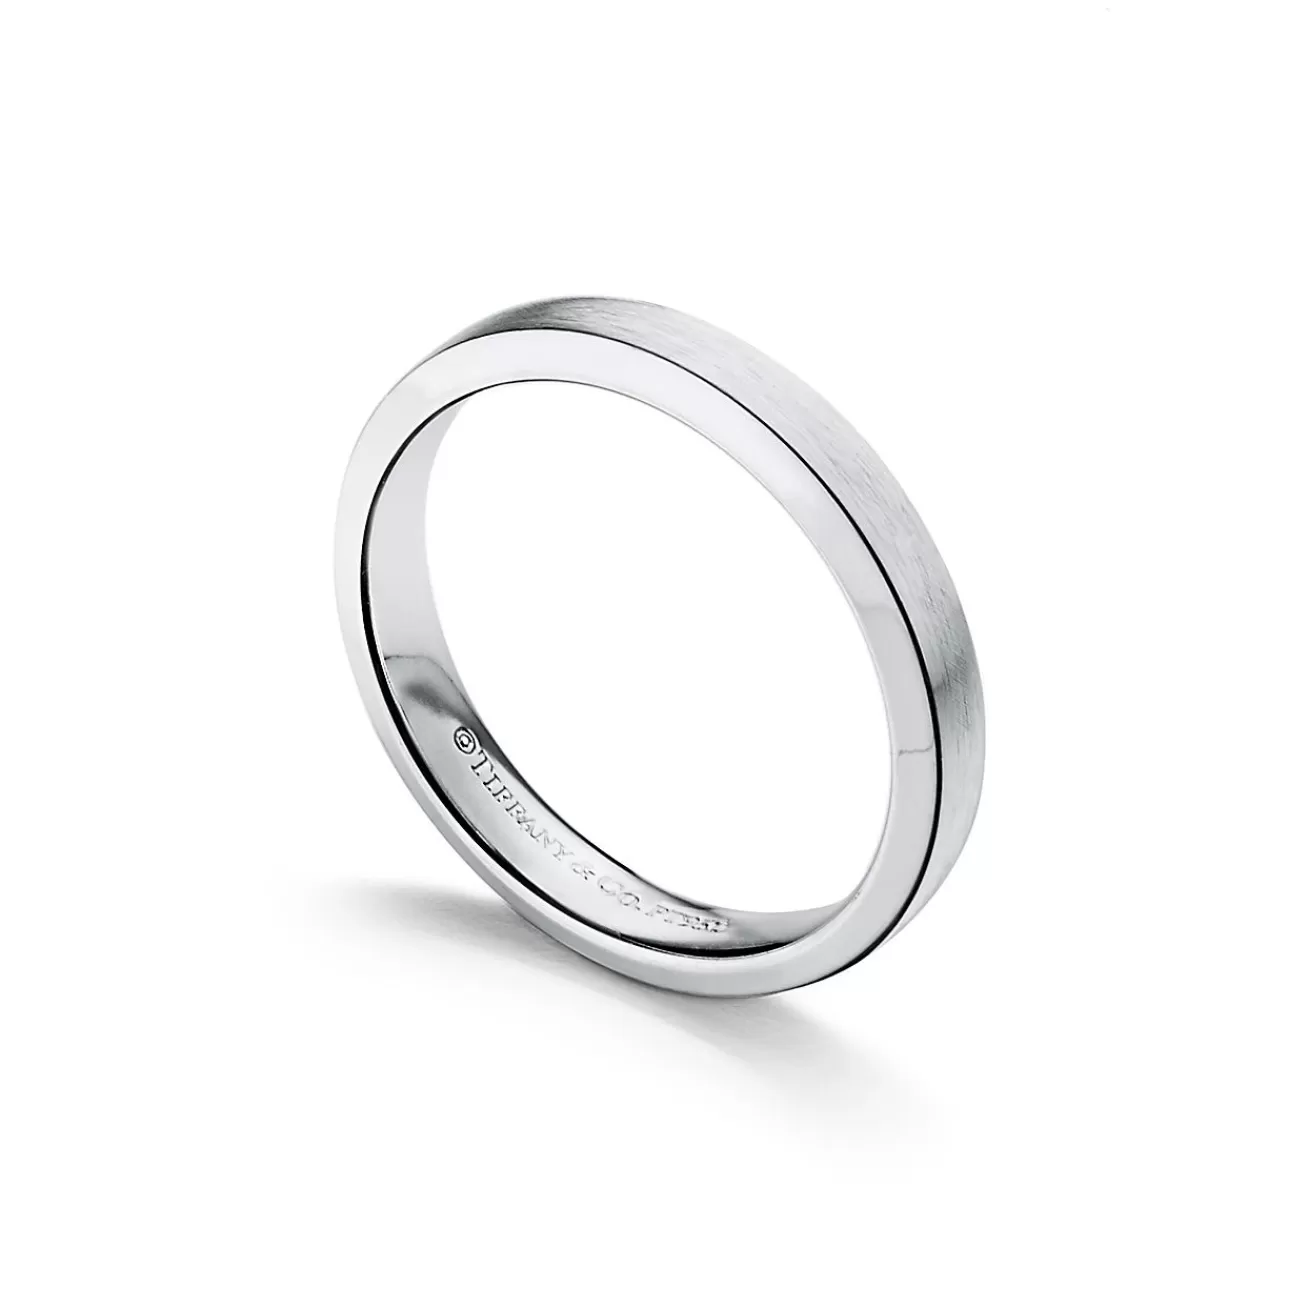 Tiffany & Co. The Charles Tiffany Setting Satin Finish Ring in Platinum, 3 mm Wide | ^Women Rings | Men's Jewelry